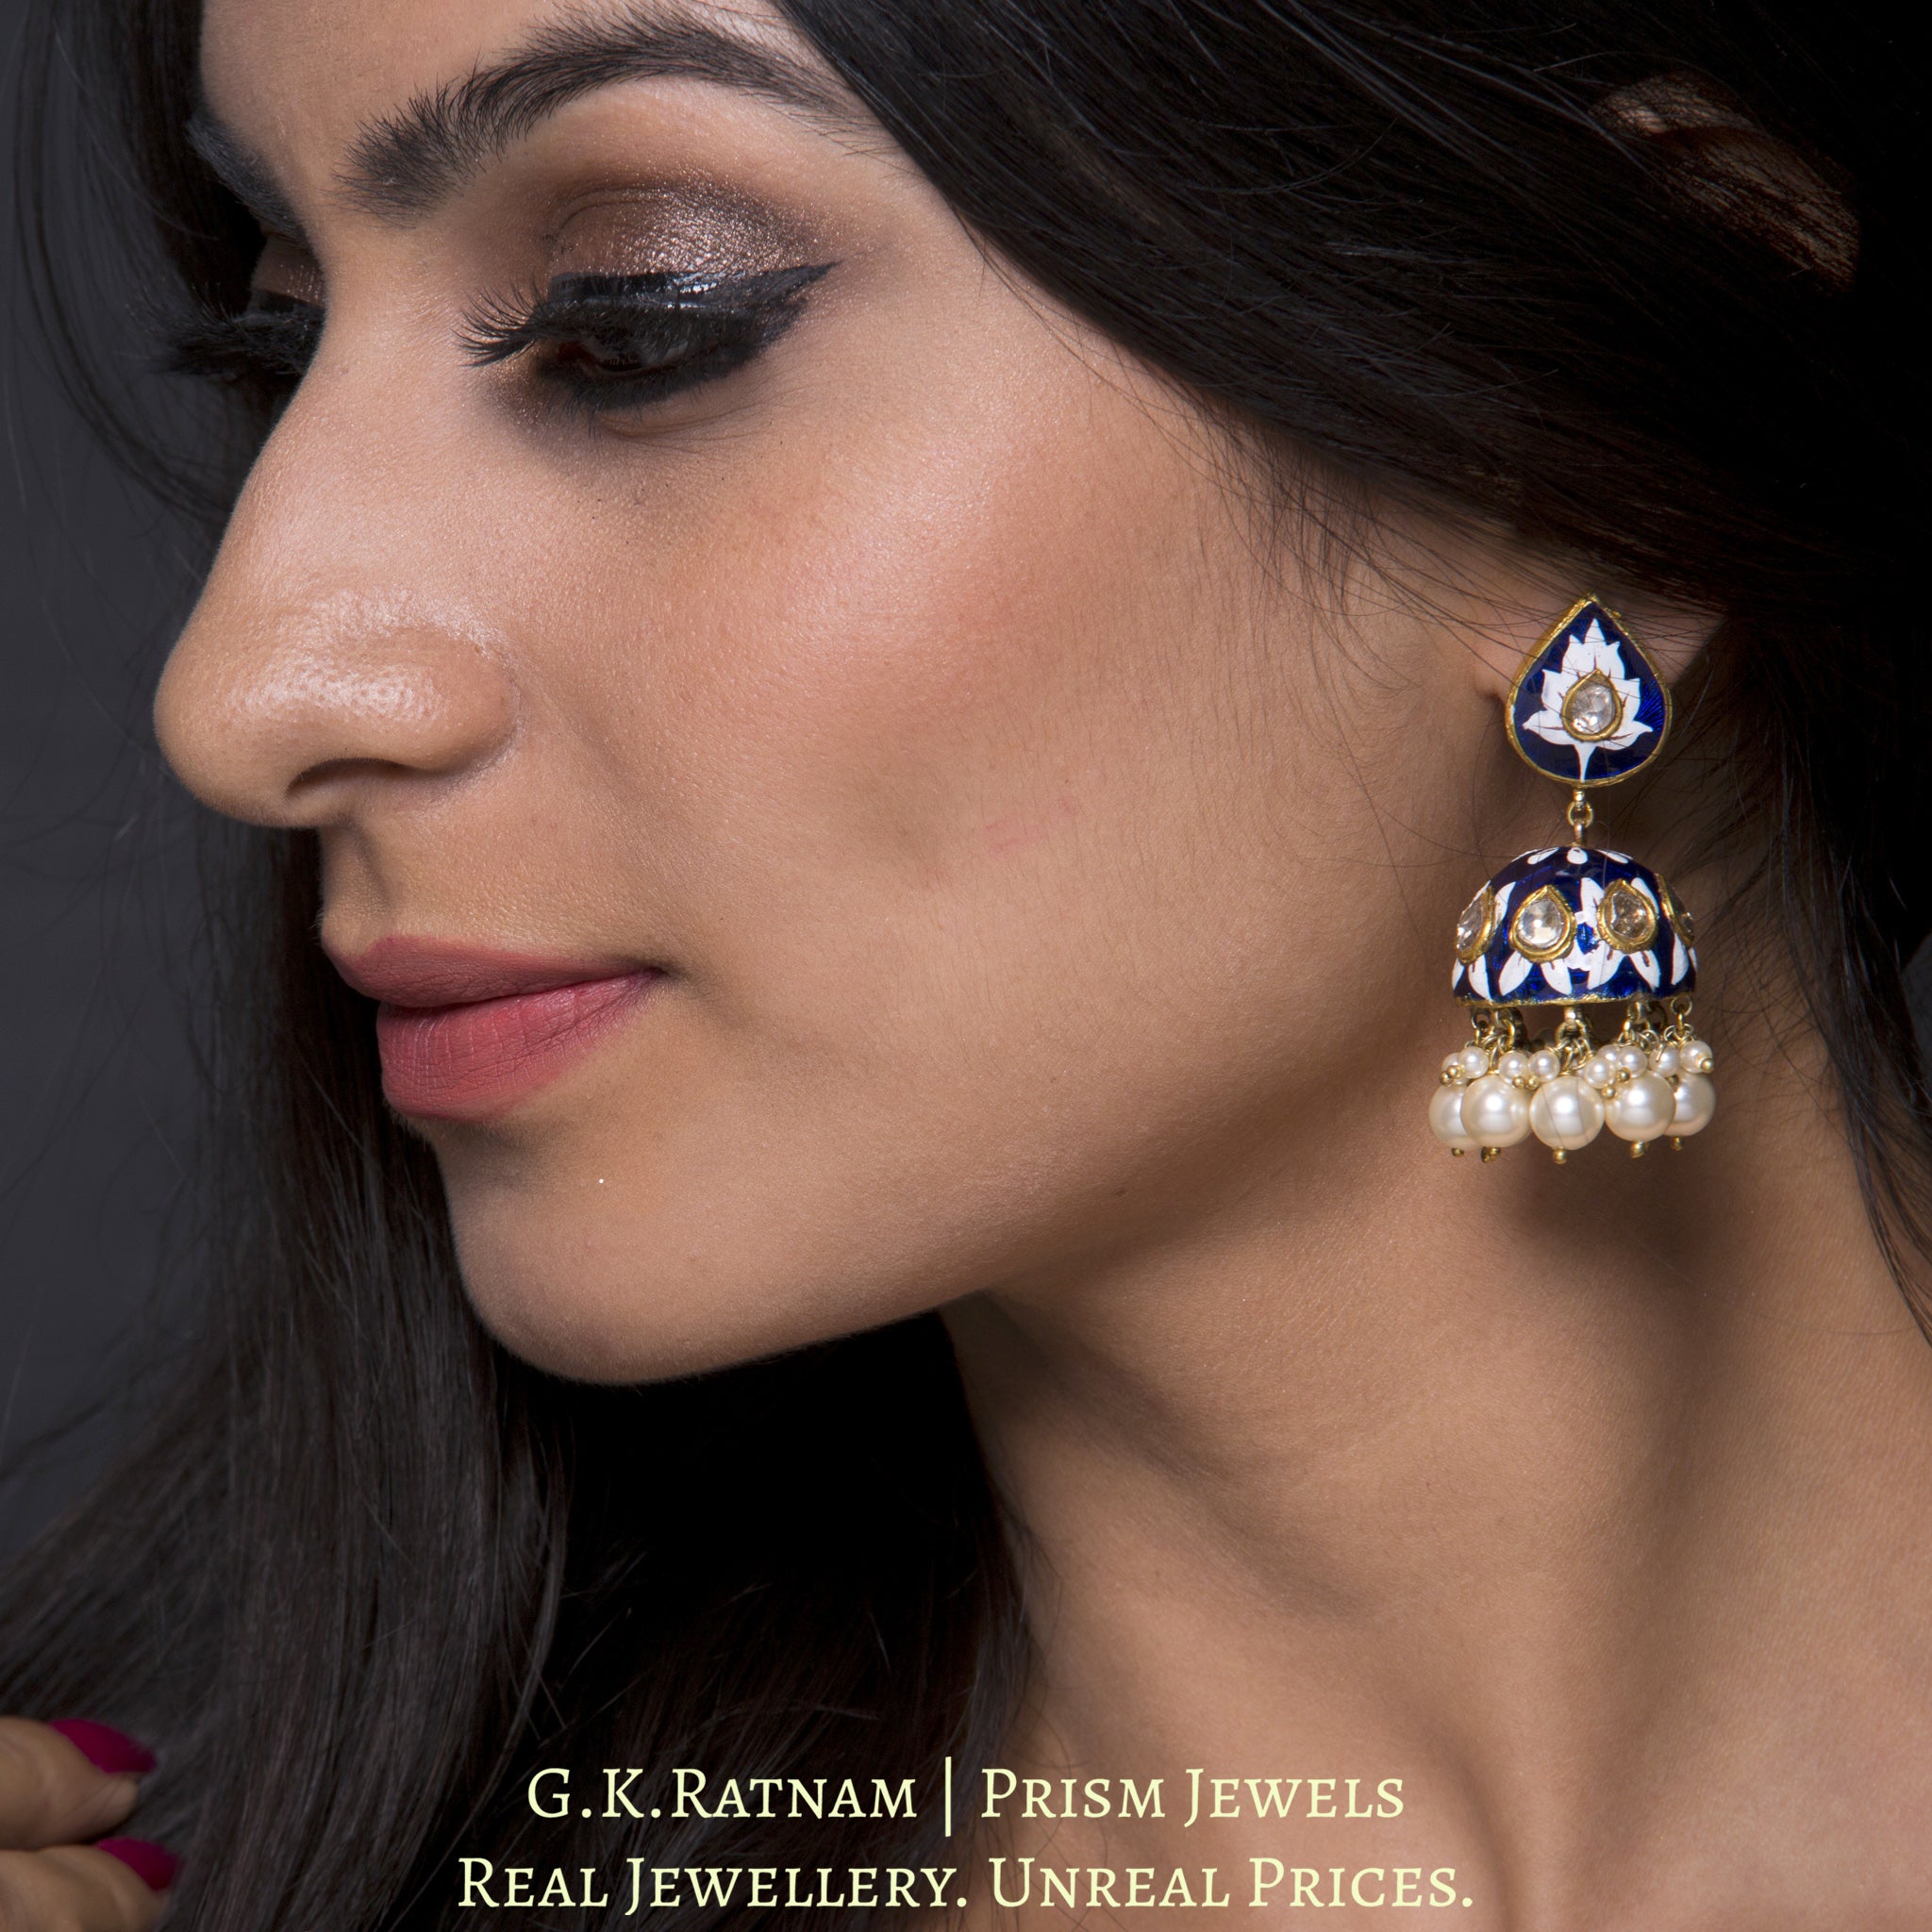 23k Gold and Diamond Polki Jhumki Earring Pair with exquisite blue pottery